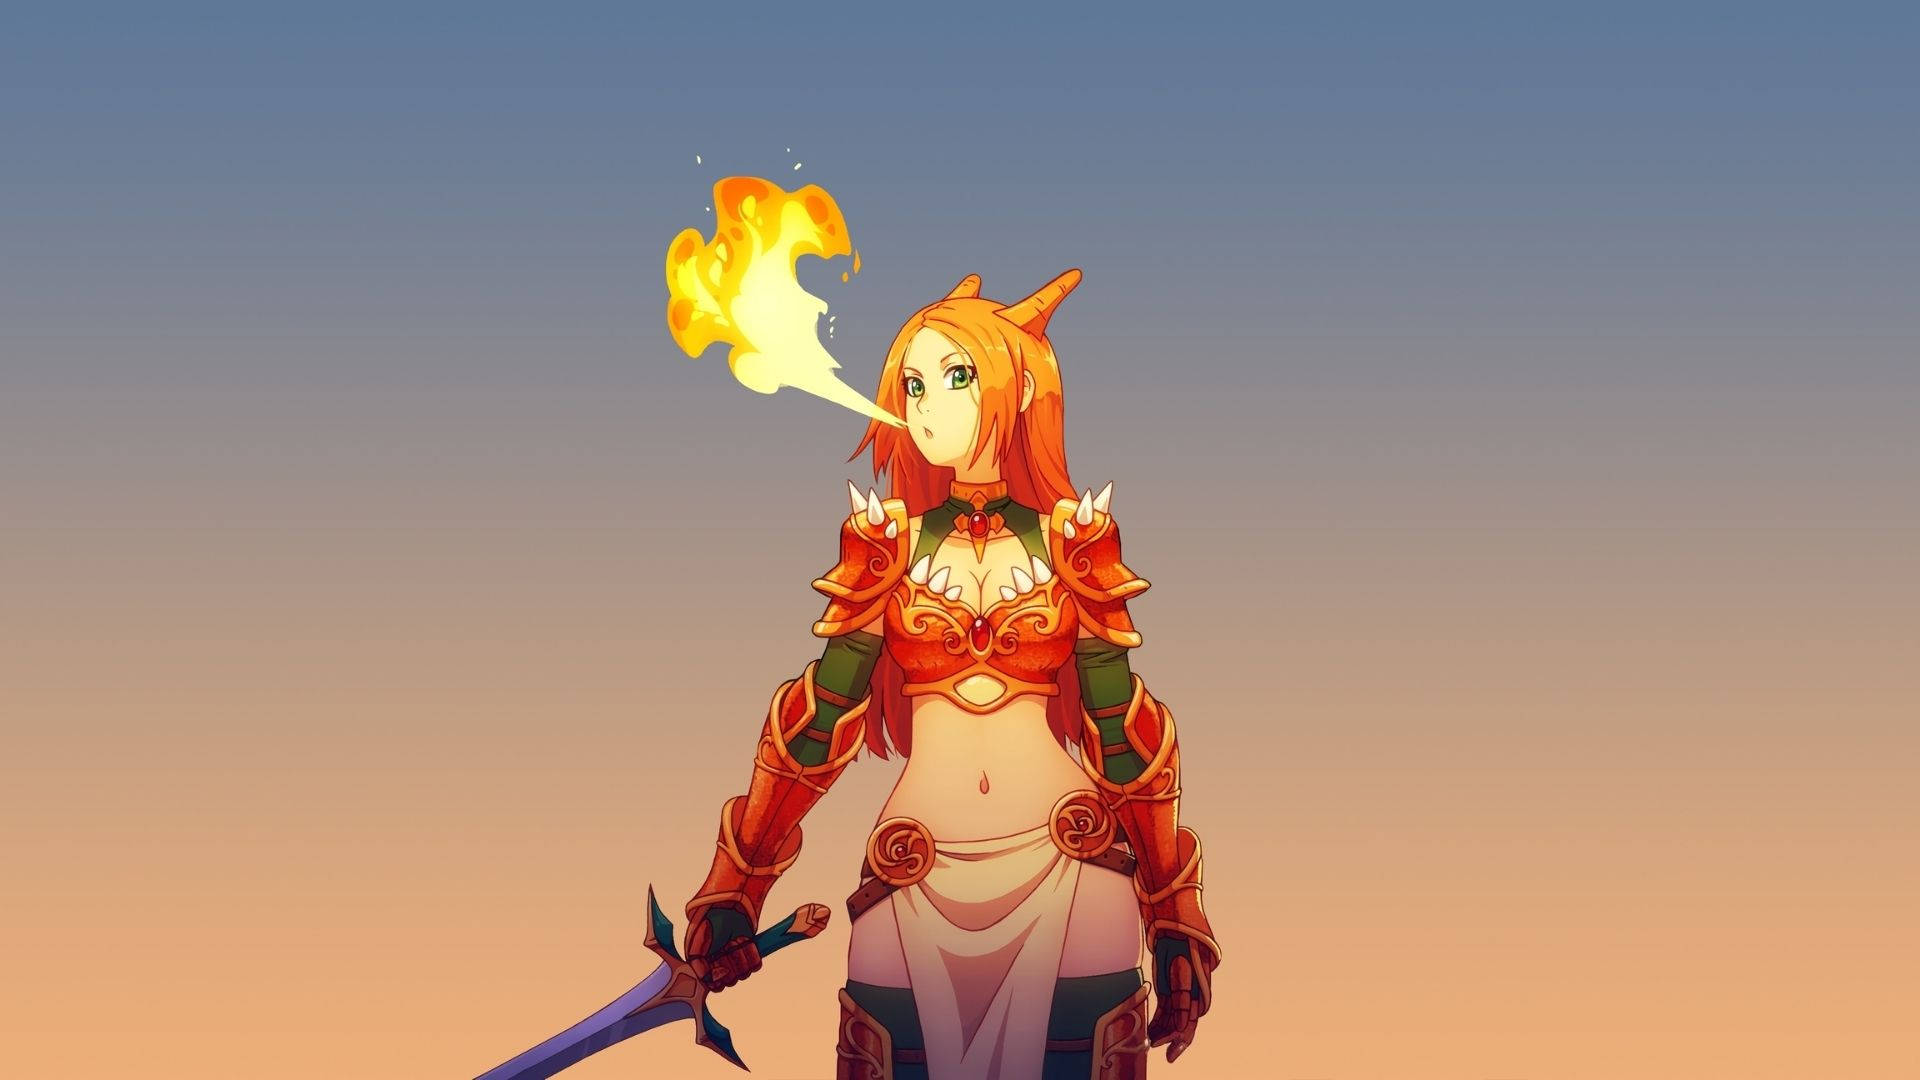 Fire Girl Blowing Flame Background